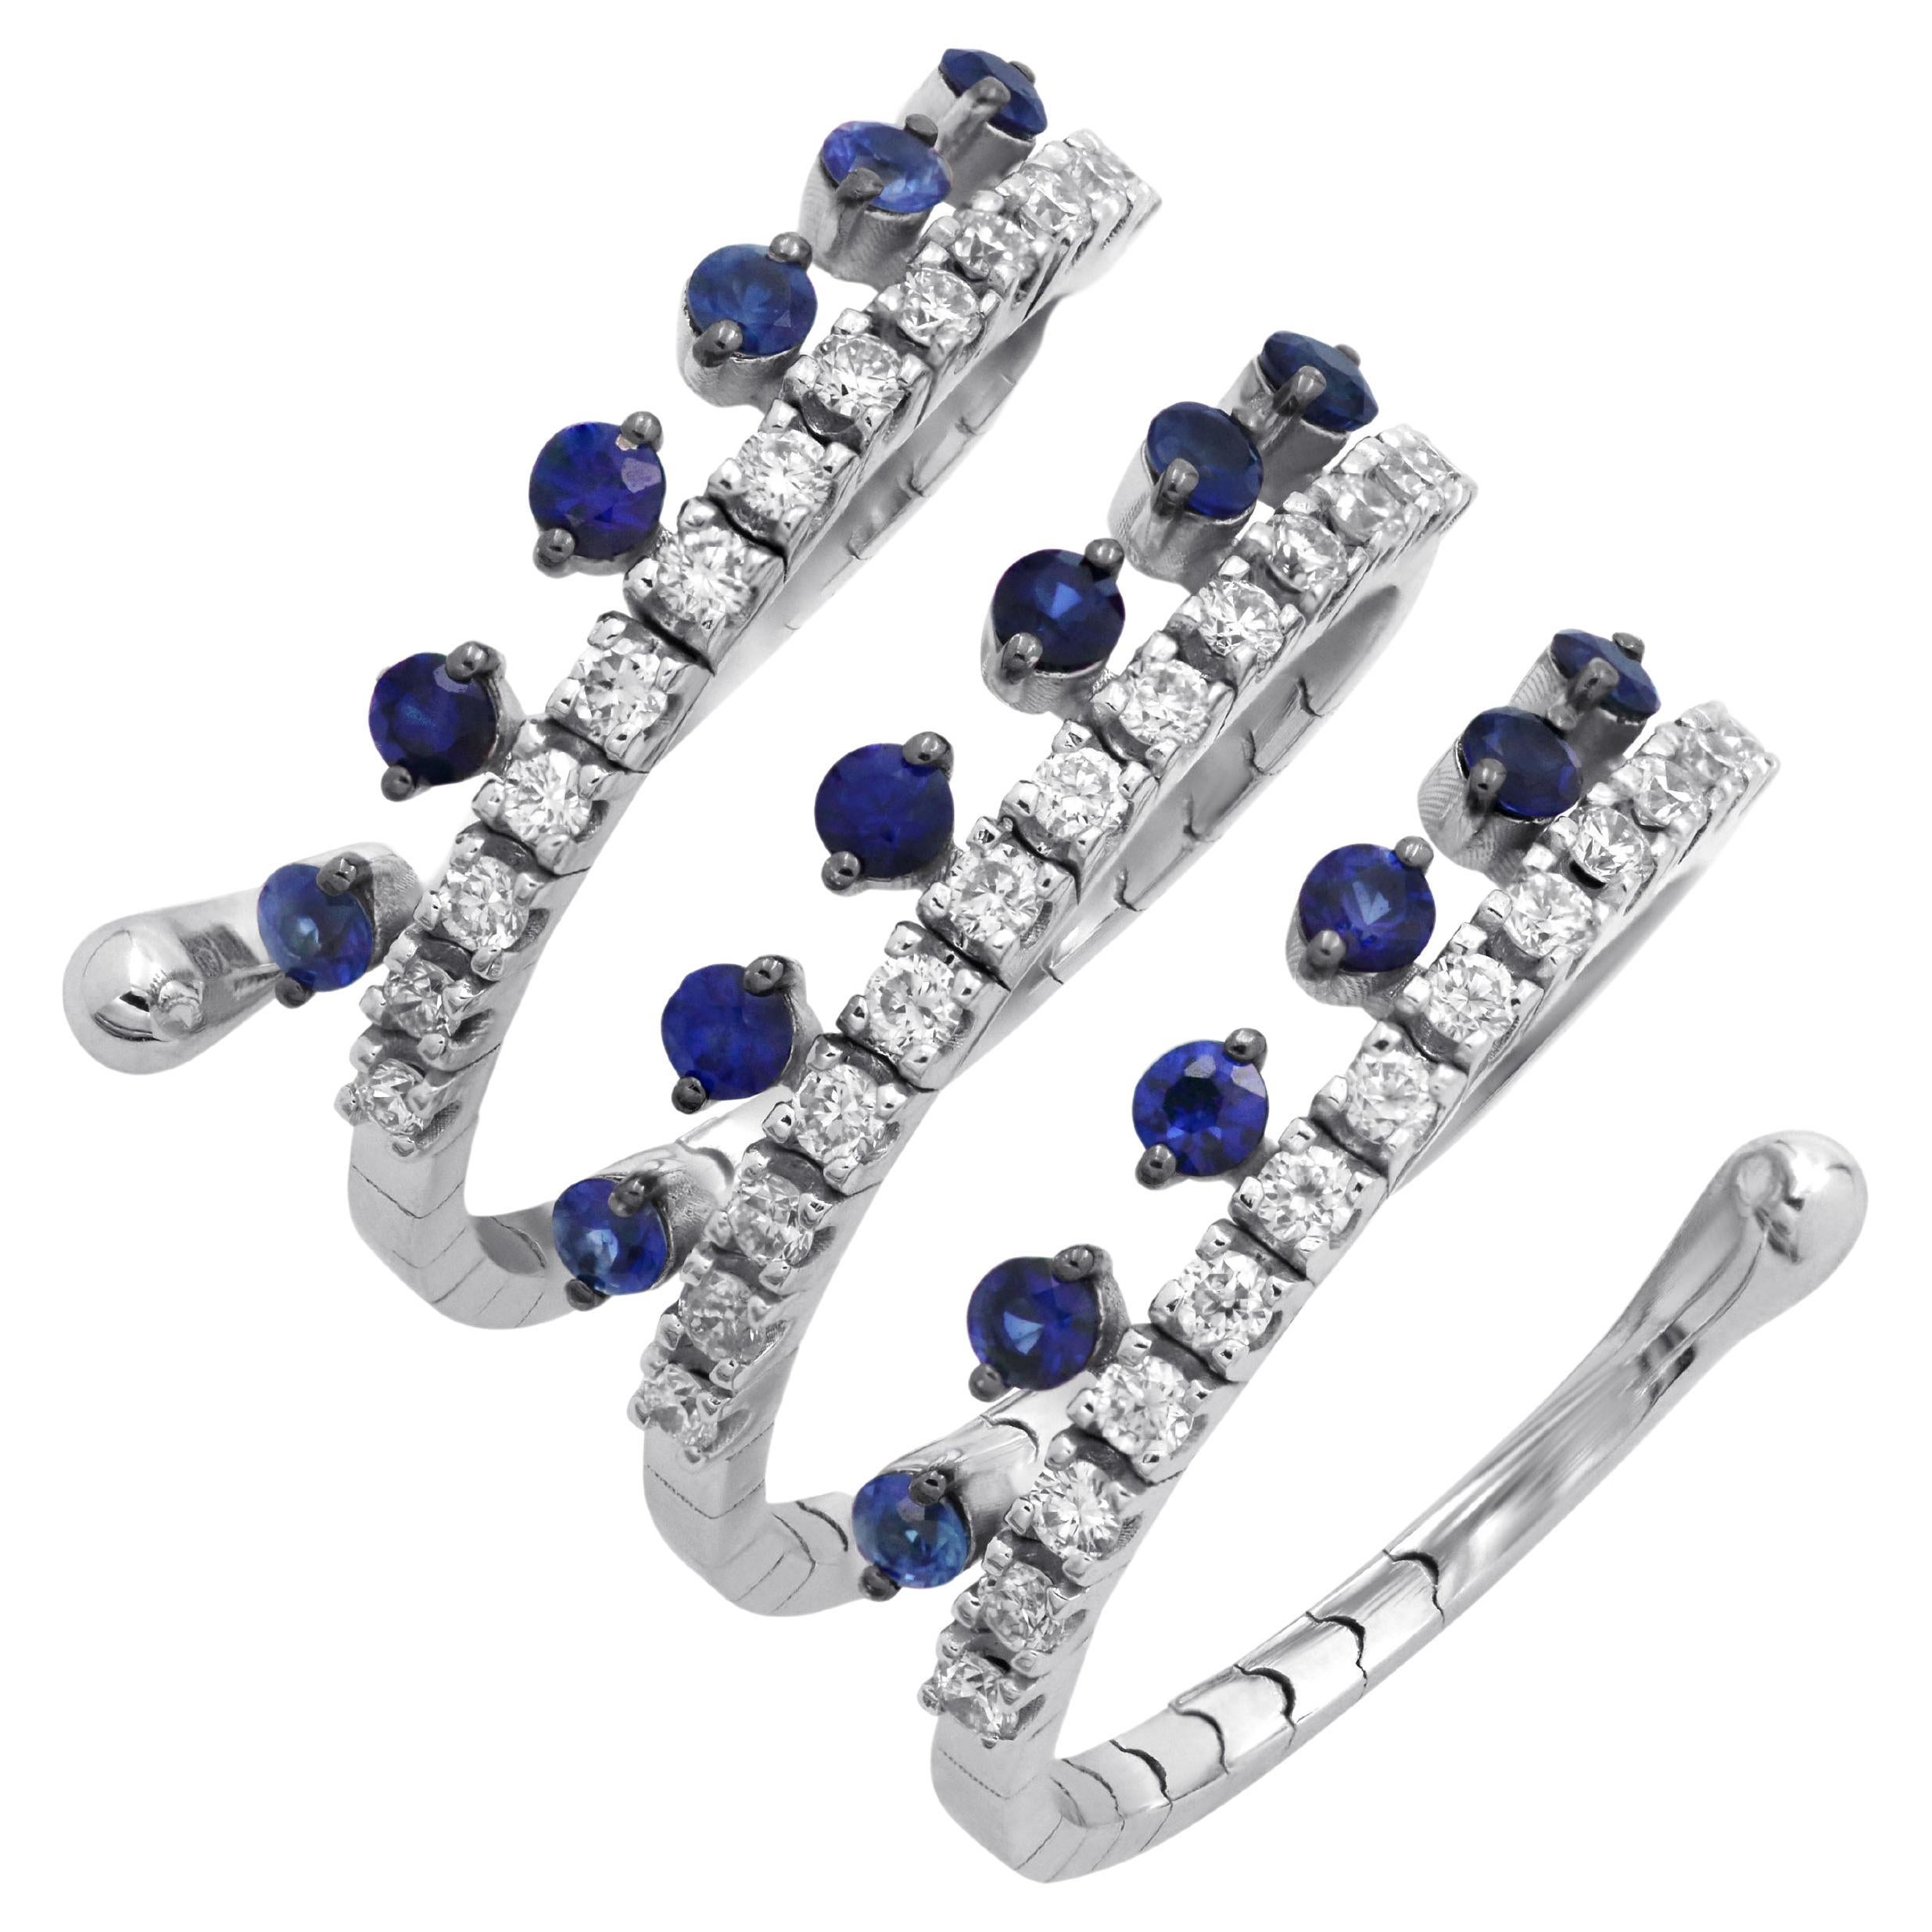 18k White Gold Spiral Ring with Blue Sapphires and Diamonds